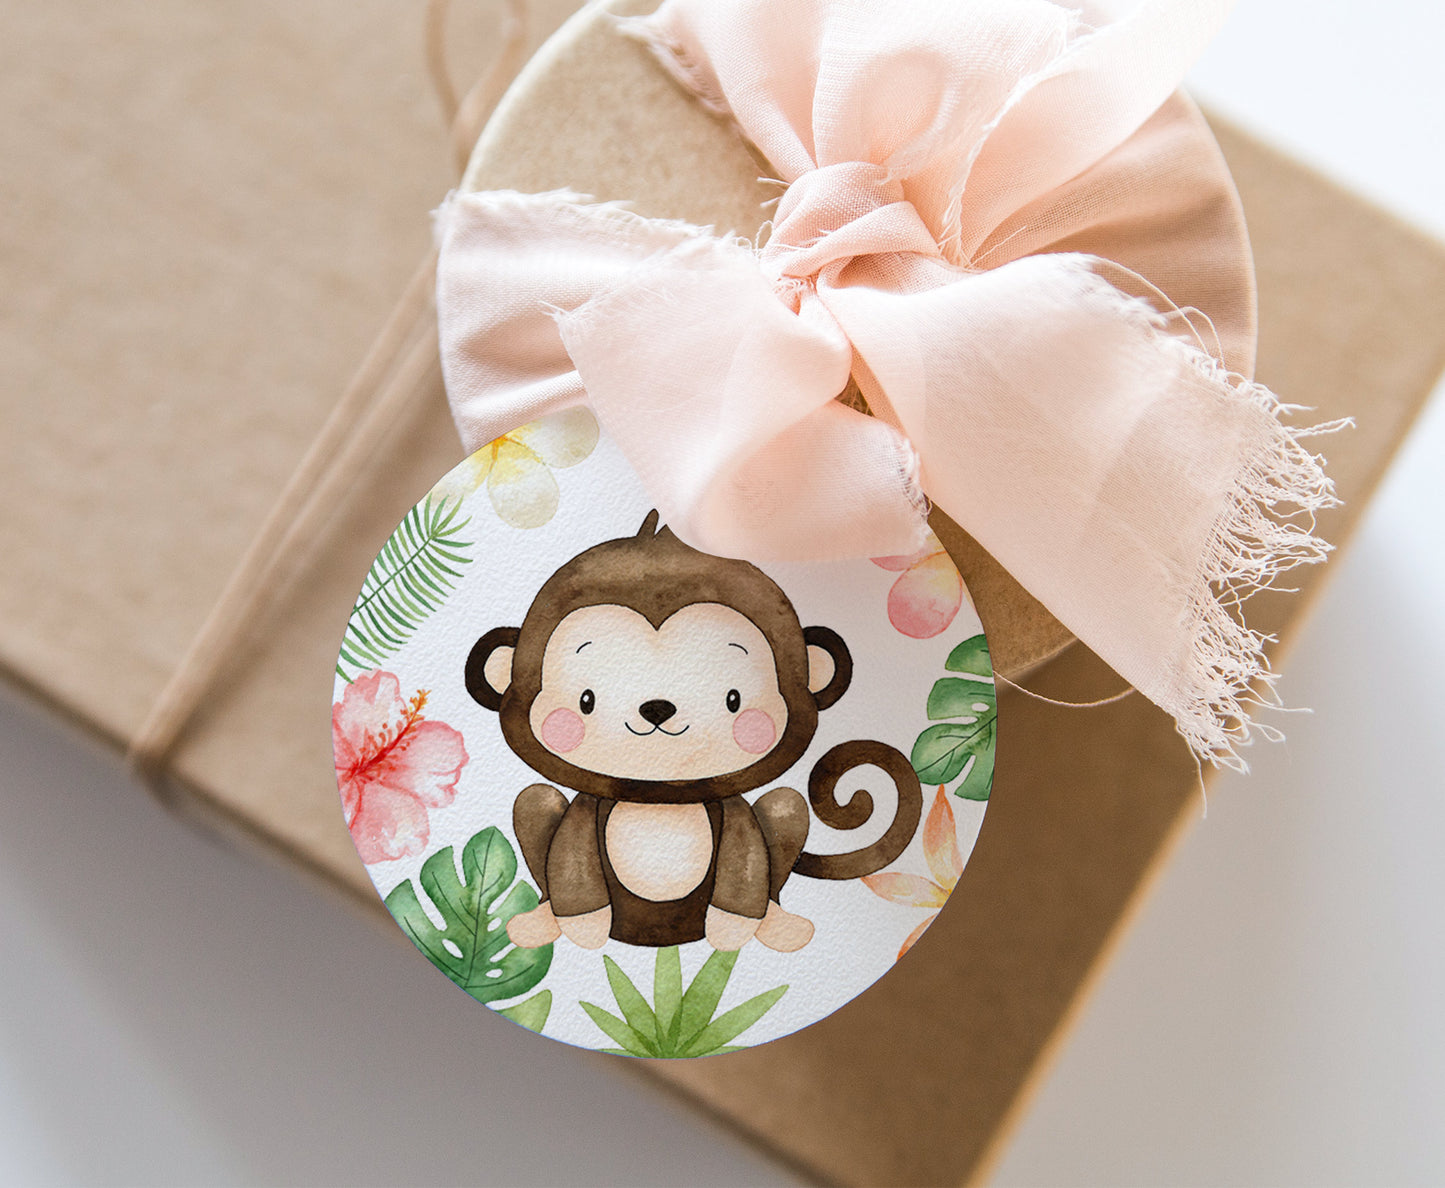 Girl Safari Cupcake Toppers | Jungle Themed Party Decorations - 35E